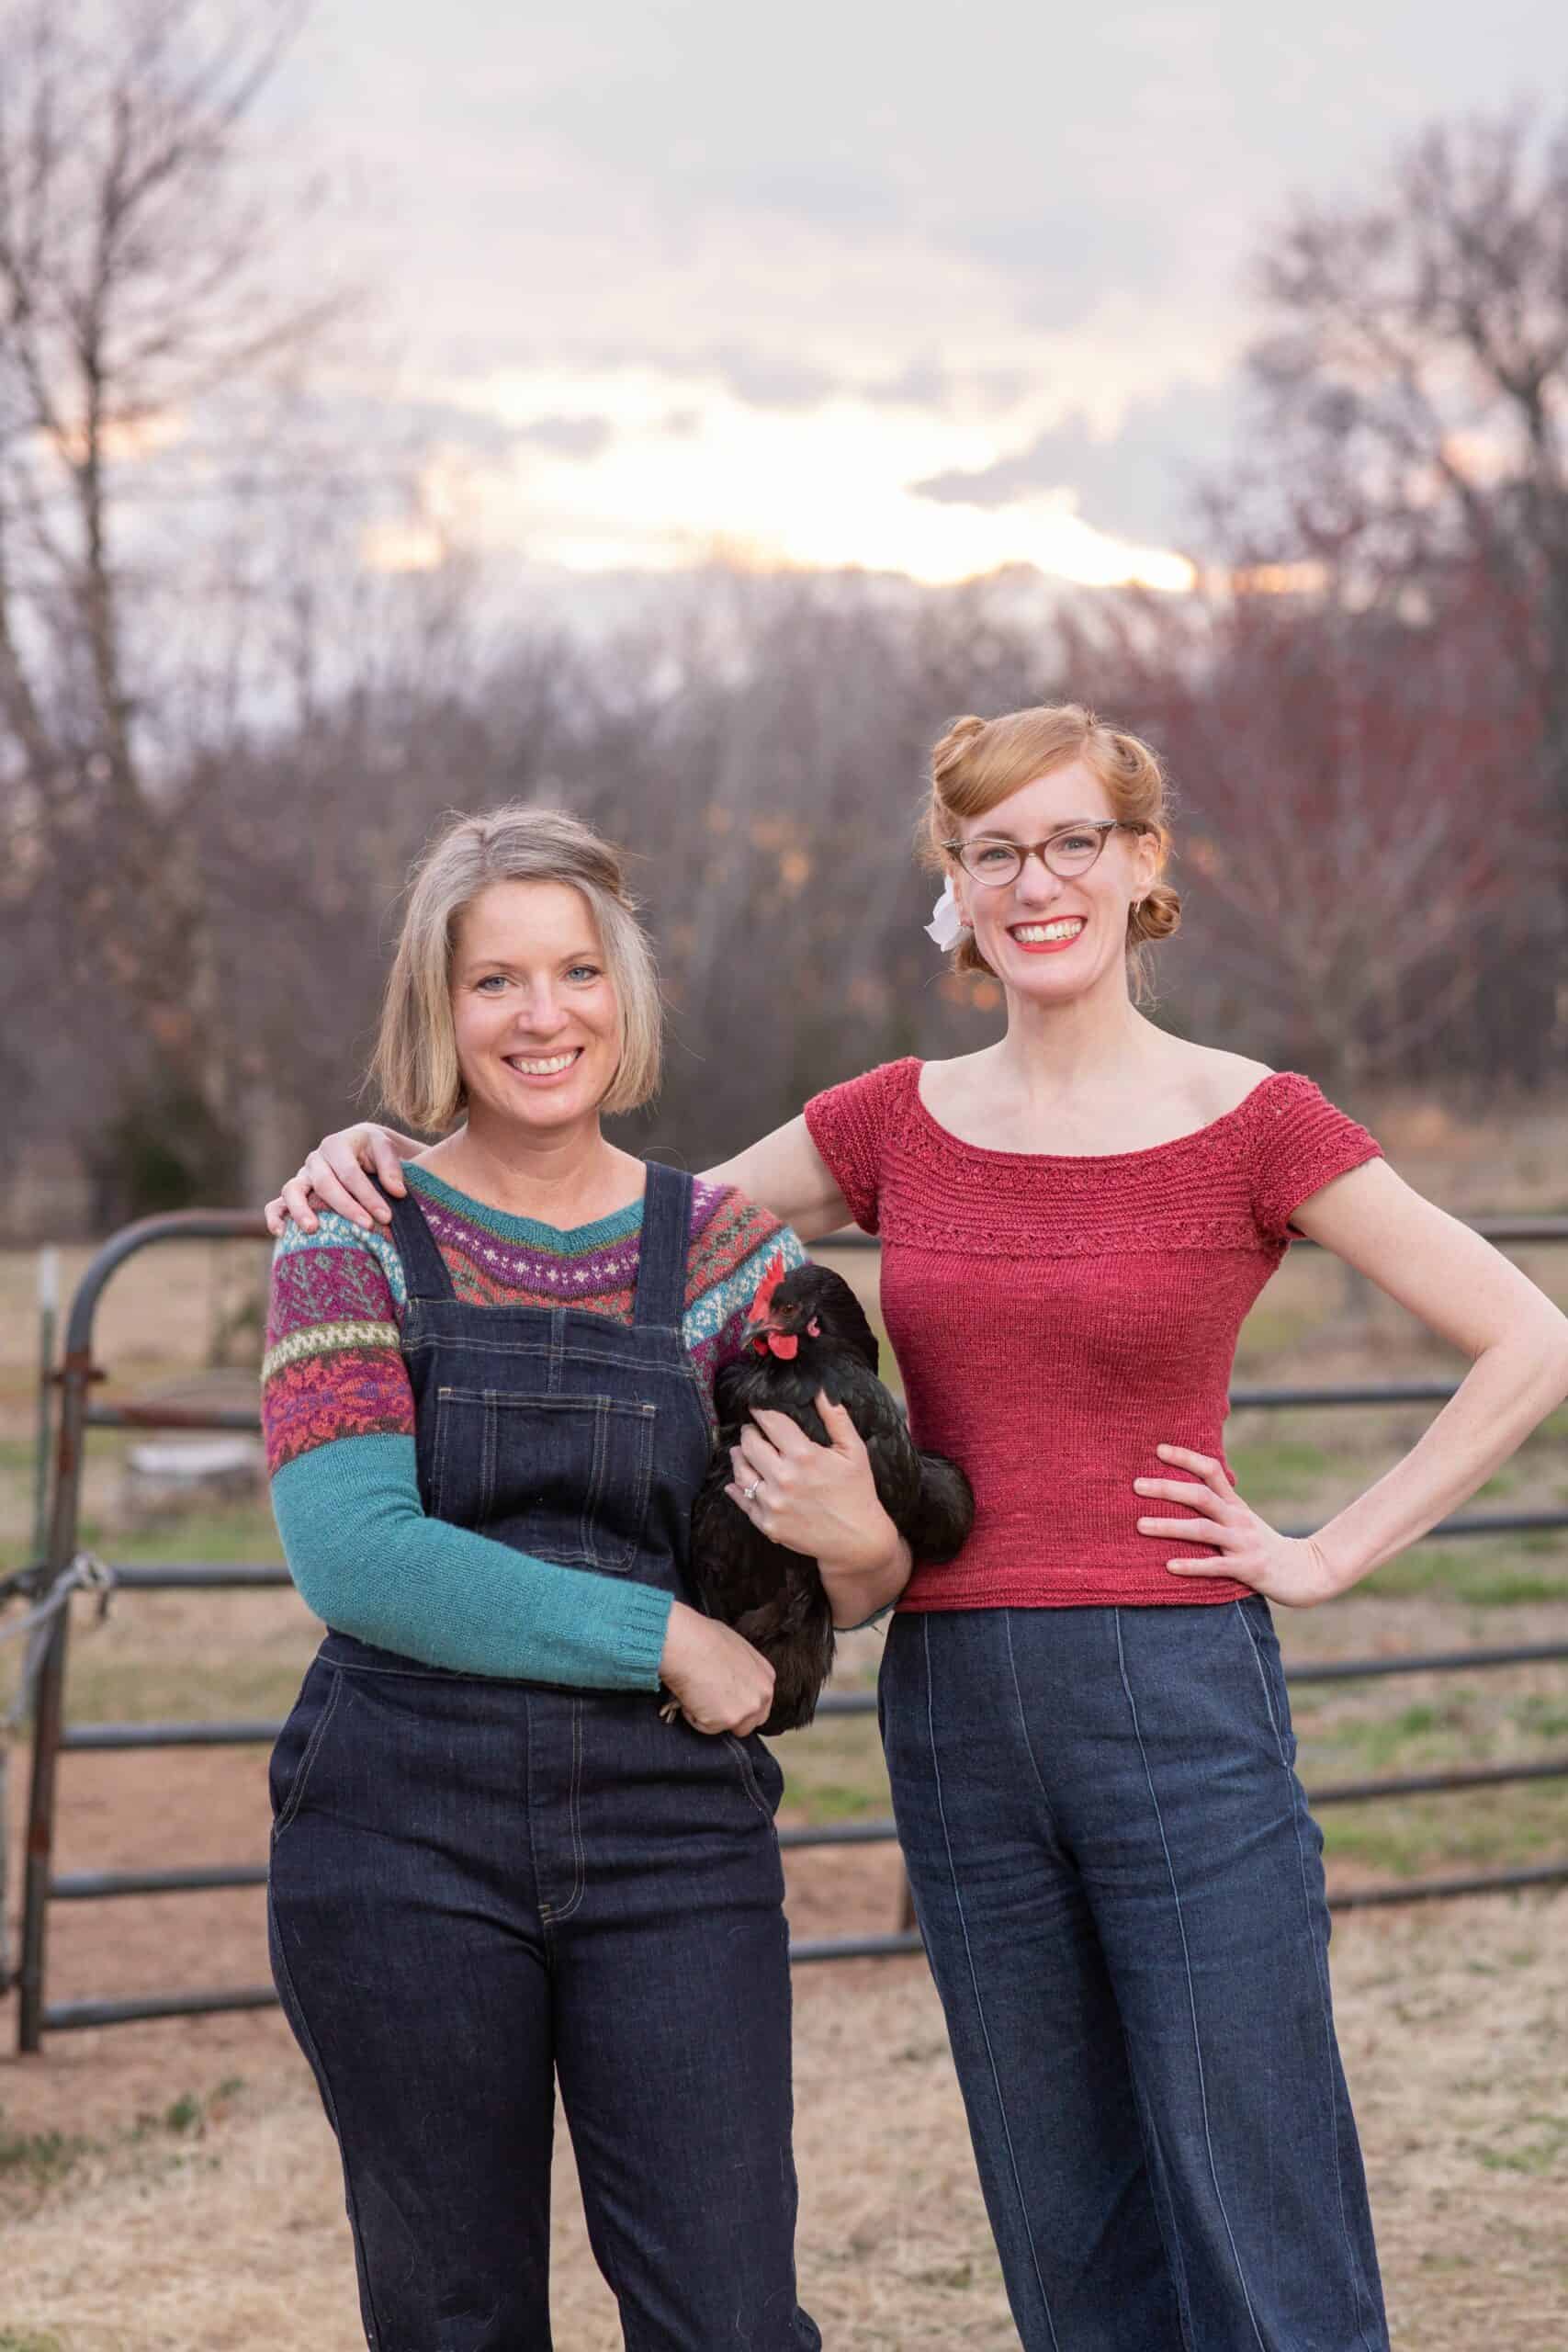 Two women standing in a field. They are wearing hand-knit sweaters.